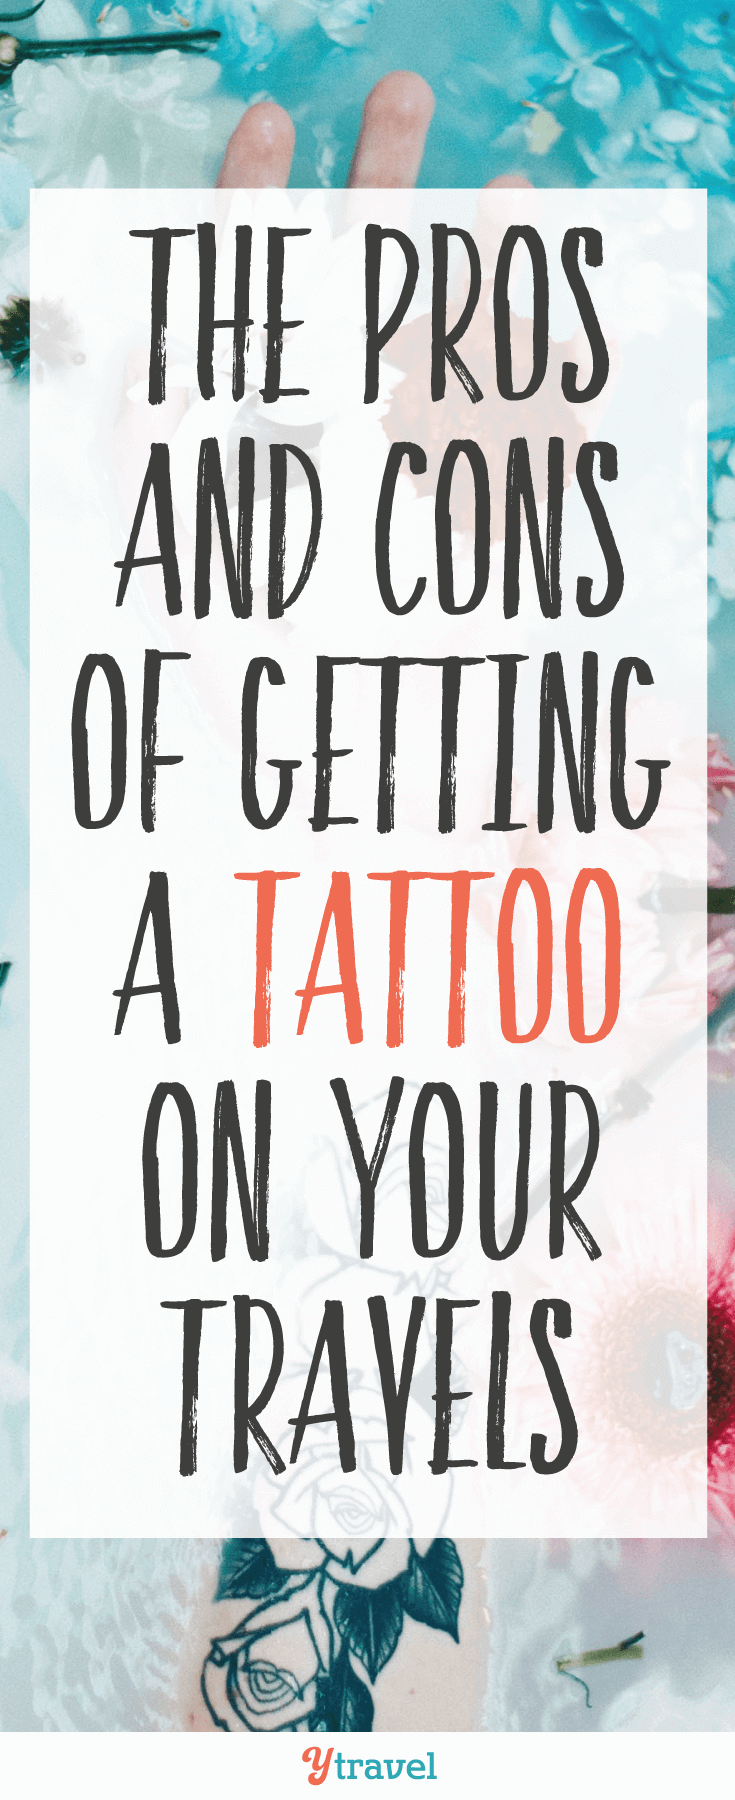 Have you ever thought about getting a tattoo on vacation? Check out the pros and cons of getting a tattoo on your travels.